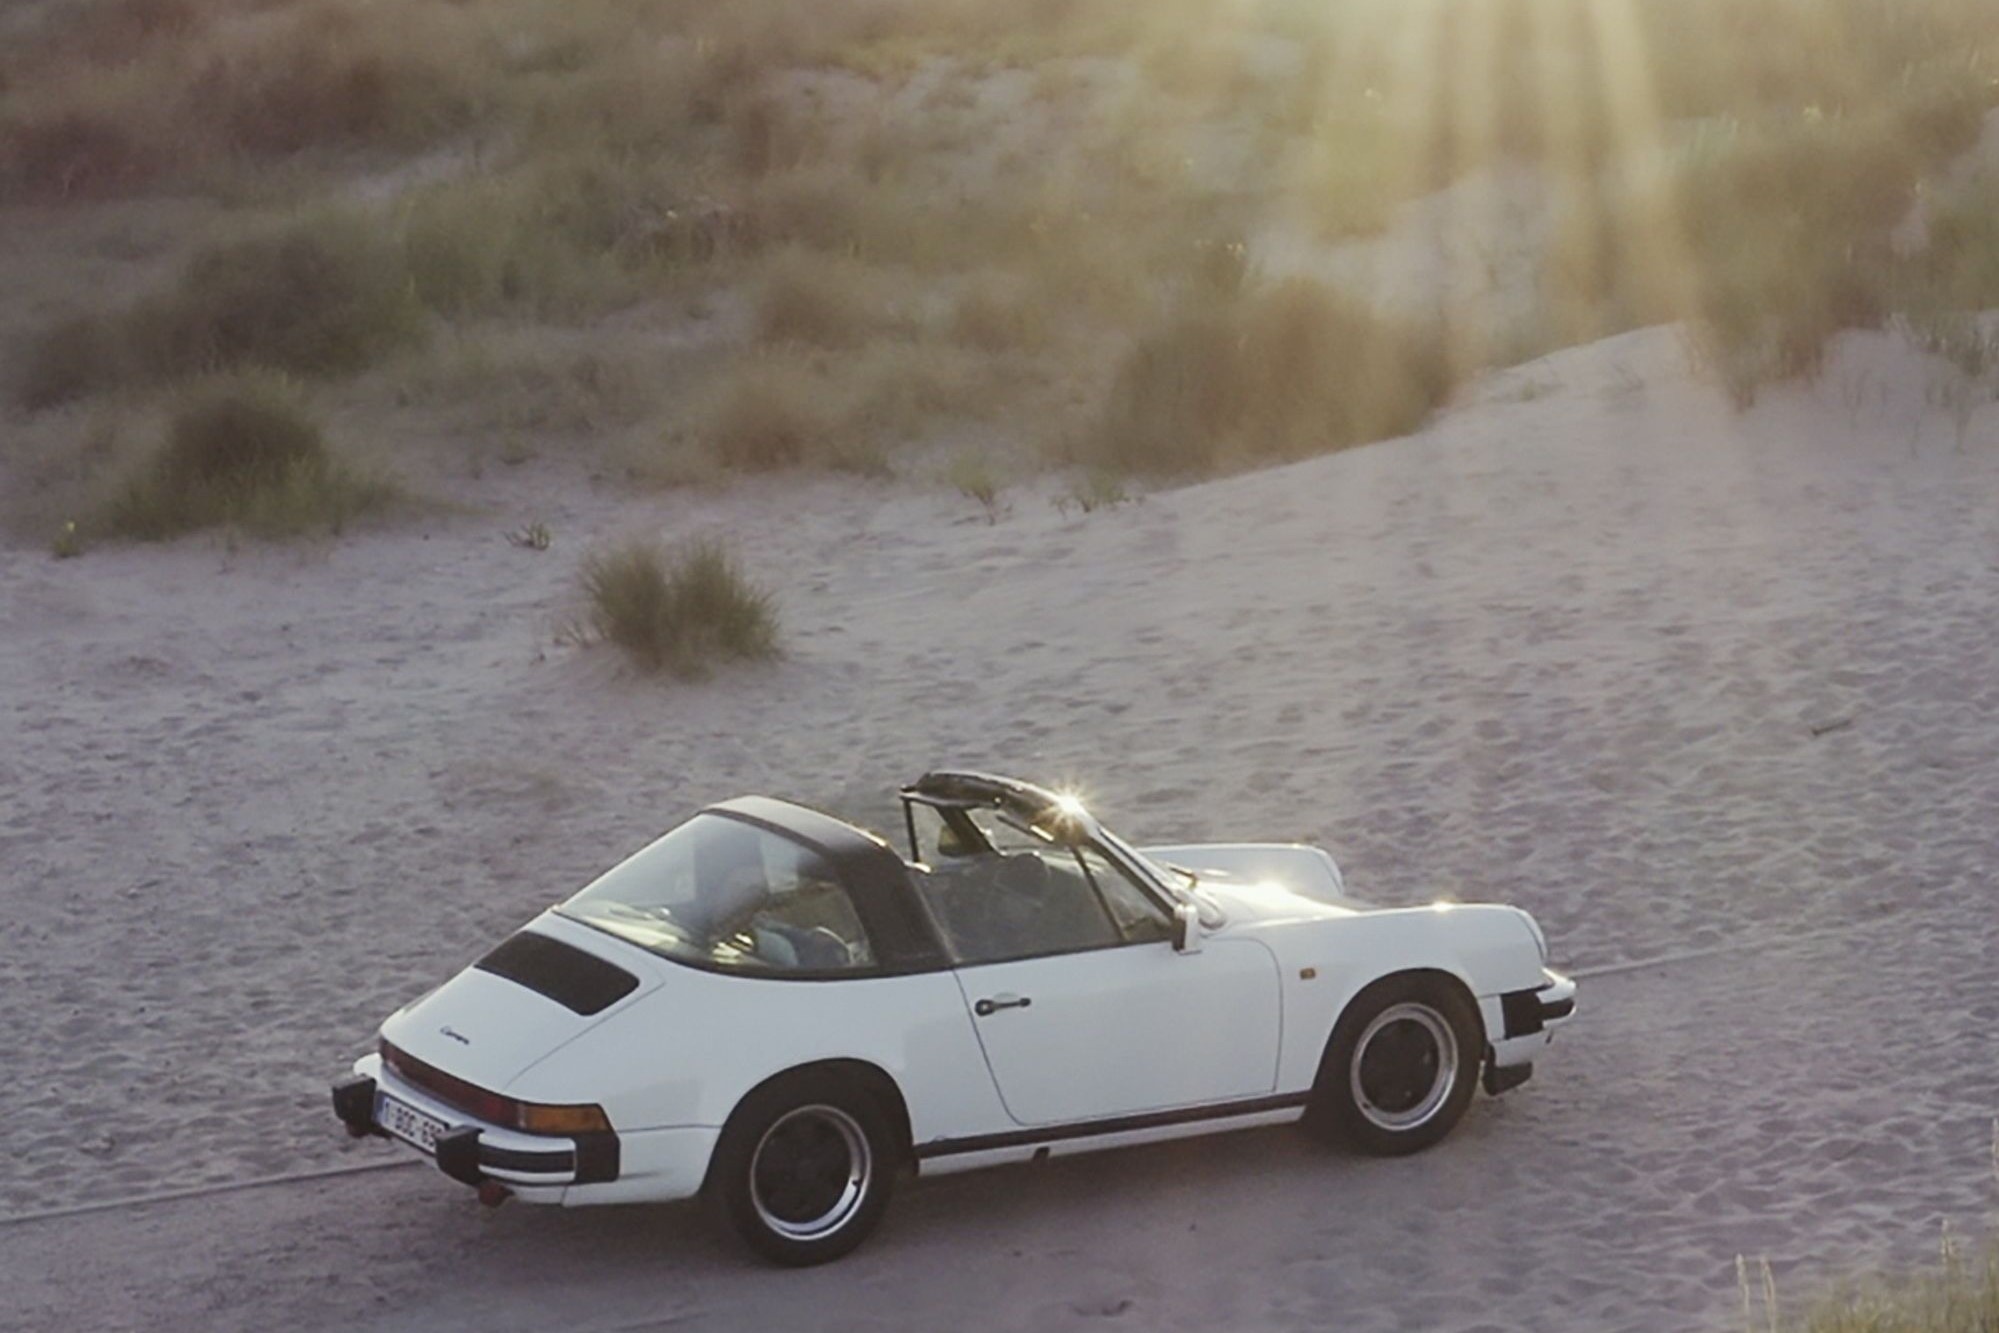 The family hits the road at the first sunny opportunity in their white 911 Targa